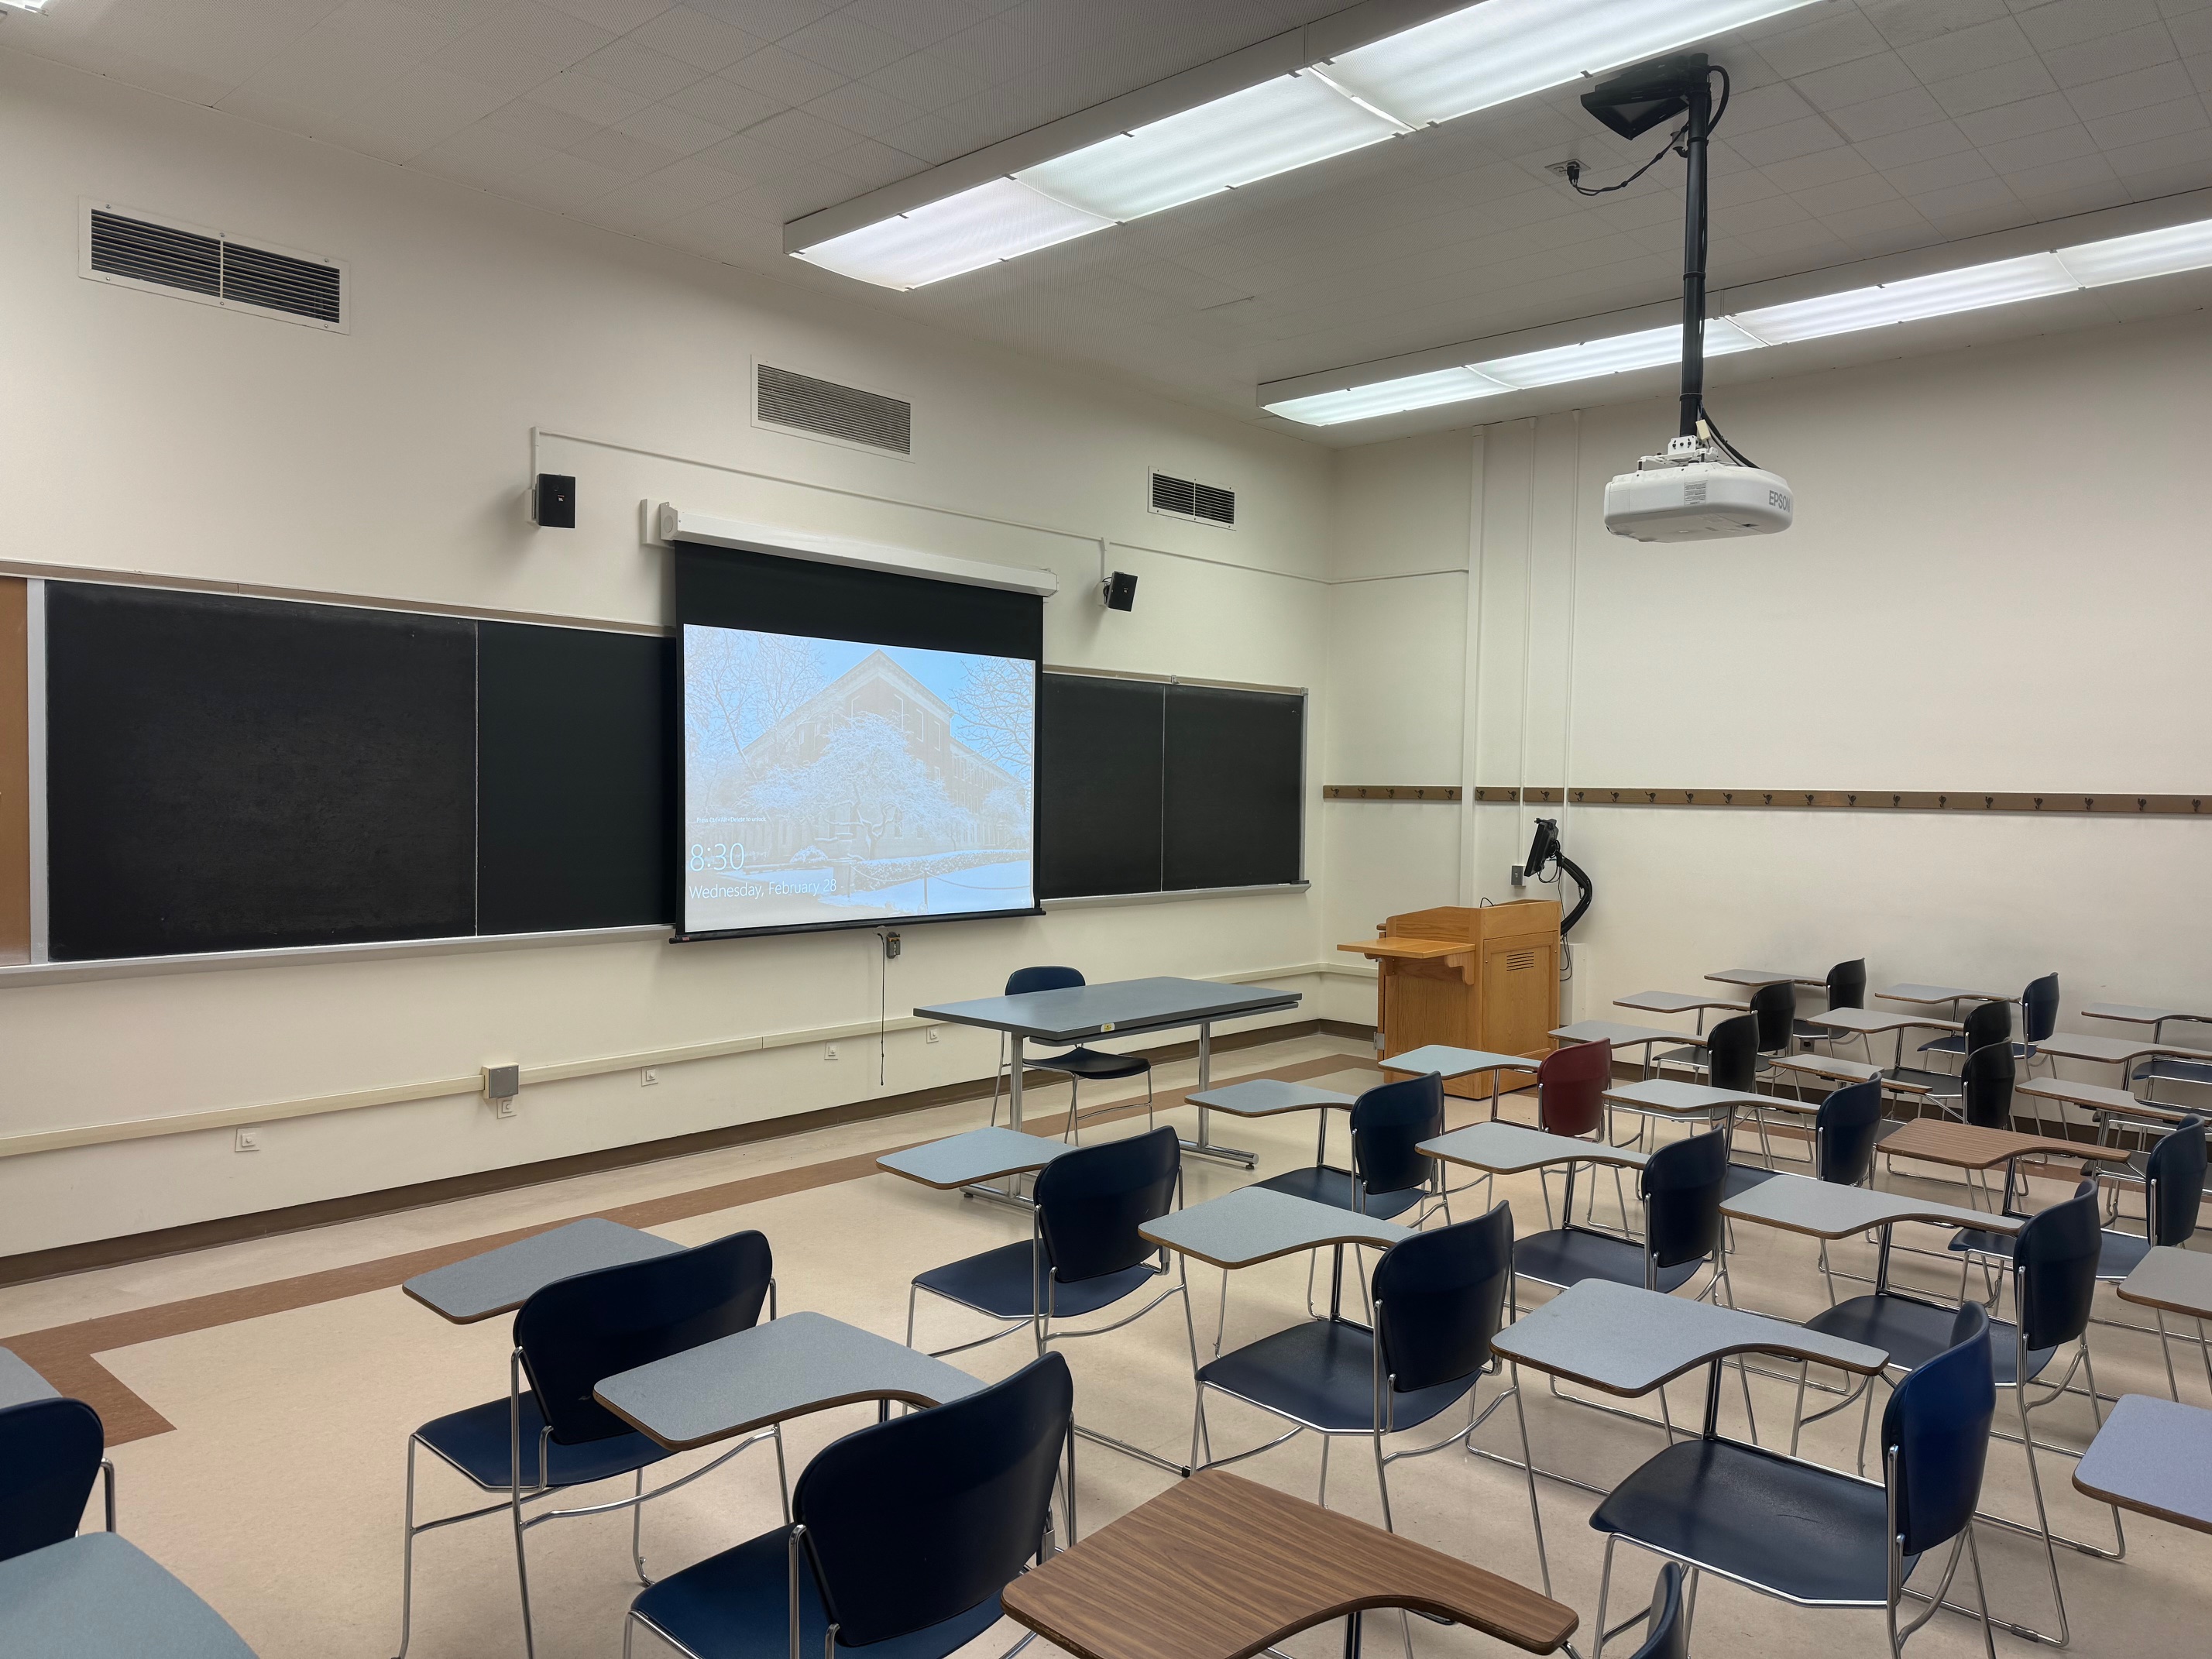 A view of the classroom with Movable Tableted Arm Chairs, projector and screen, chalkboard, instructor lectern, and instructor table in front.